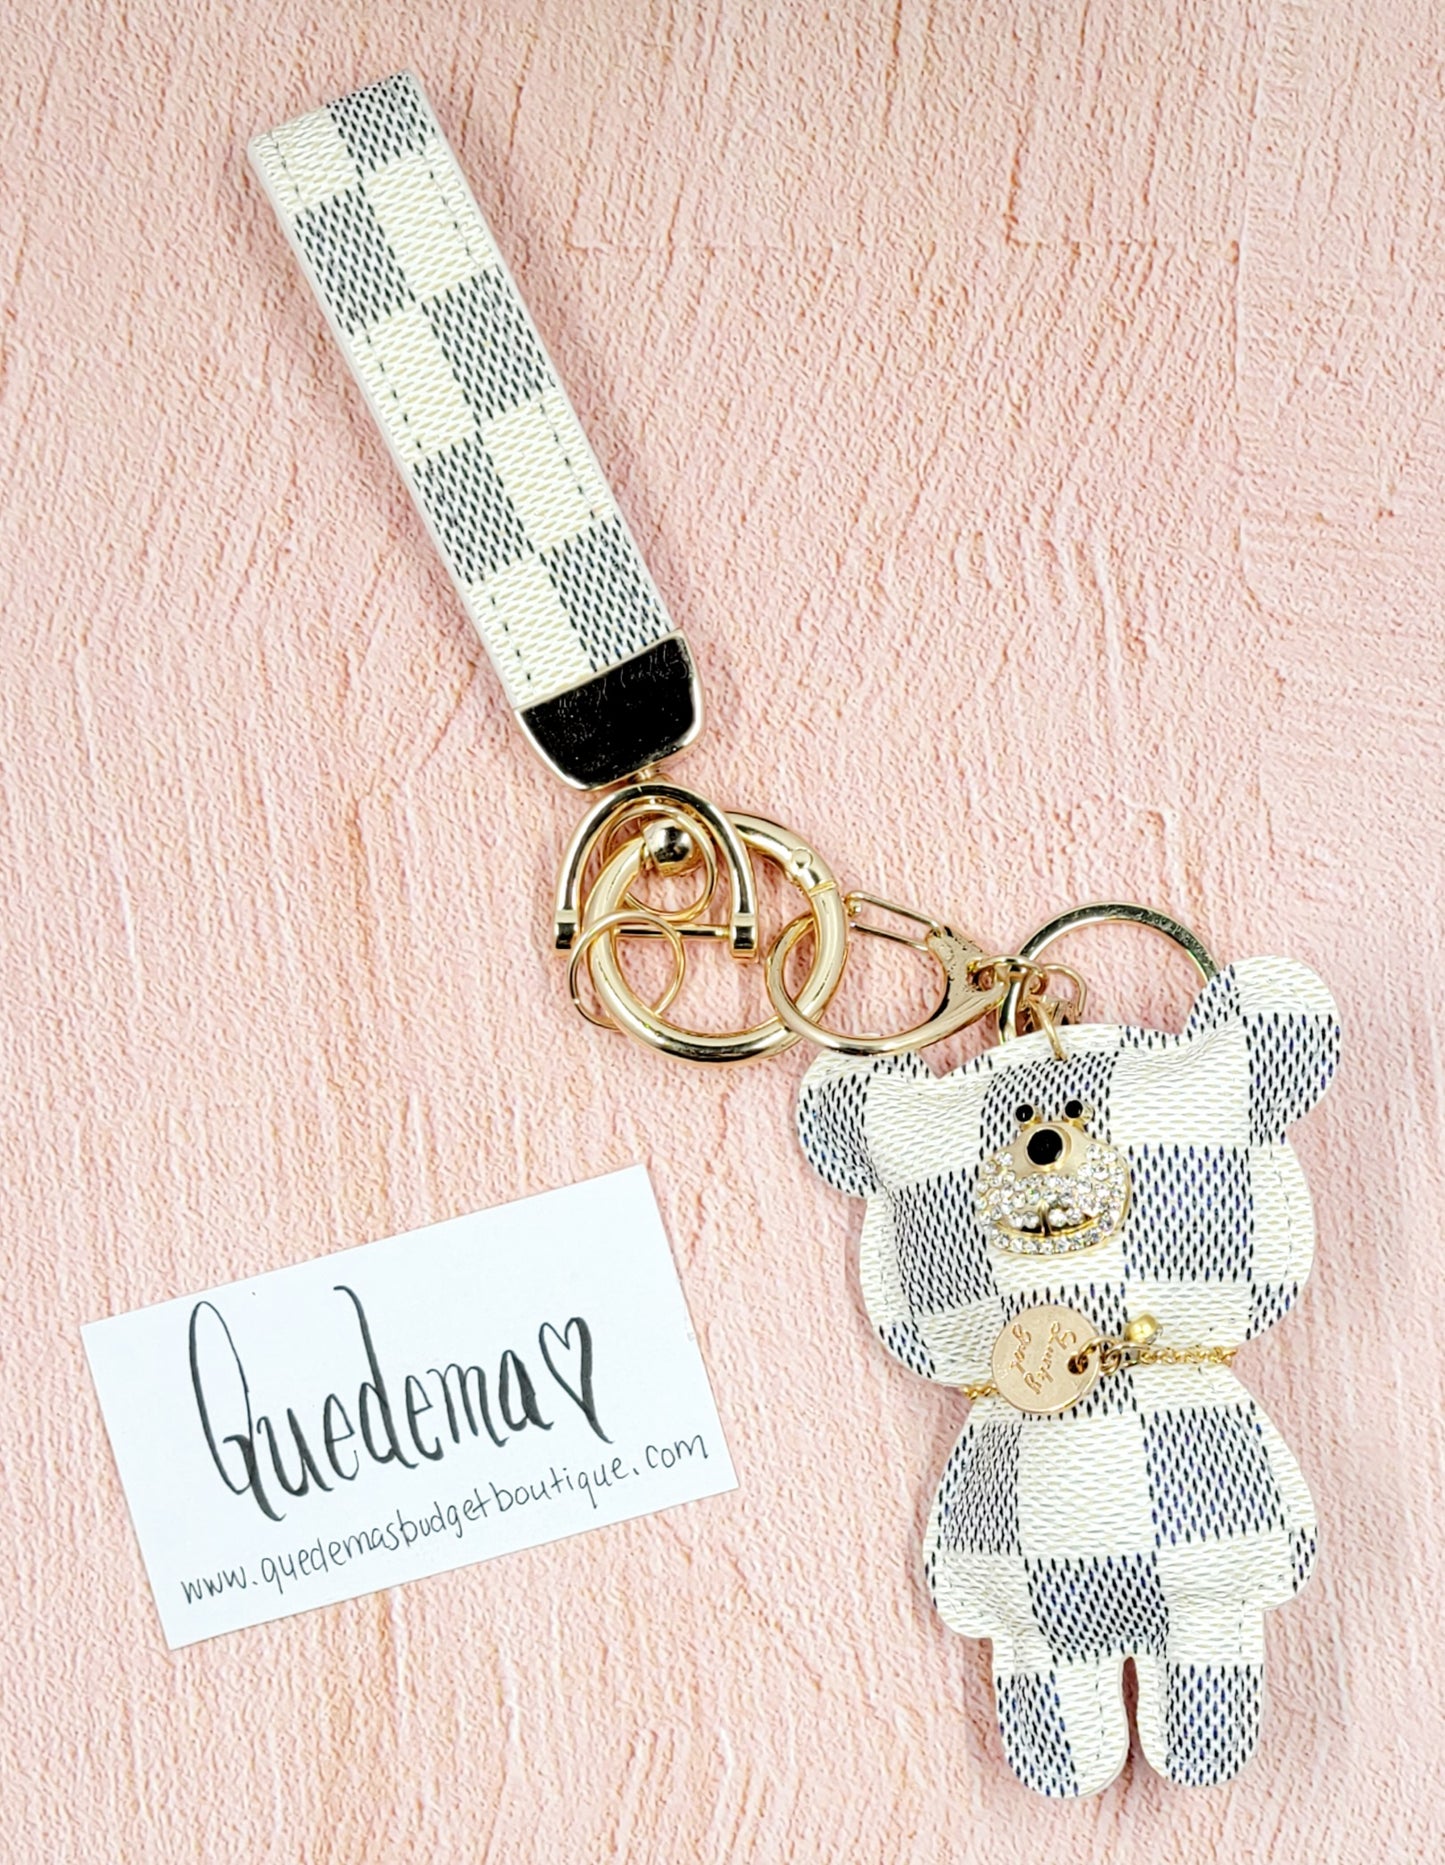 Checkered Bear Keychain & Wristlet! Checkered Bear Planner Charm! 3 Options Available!!